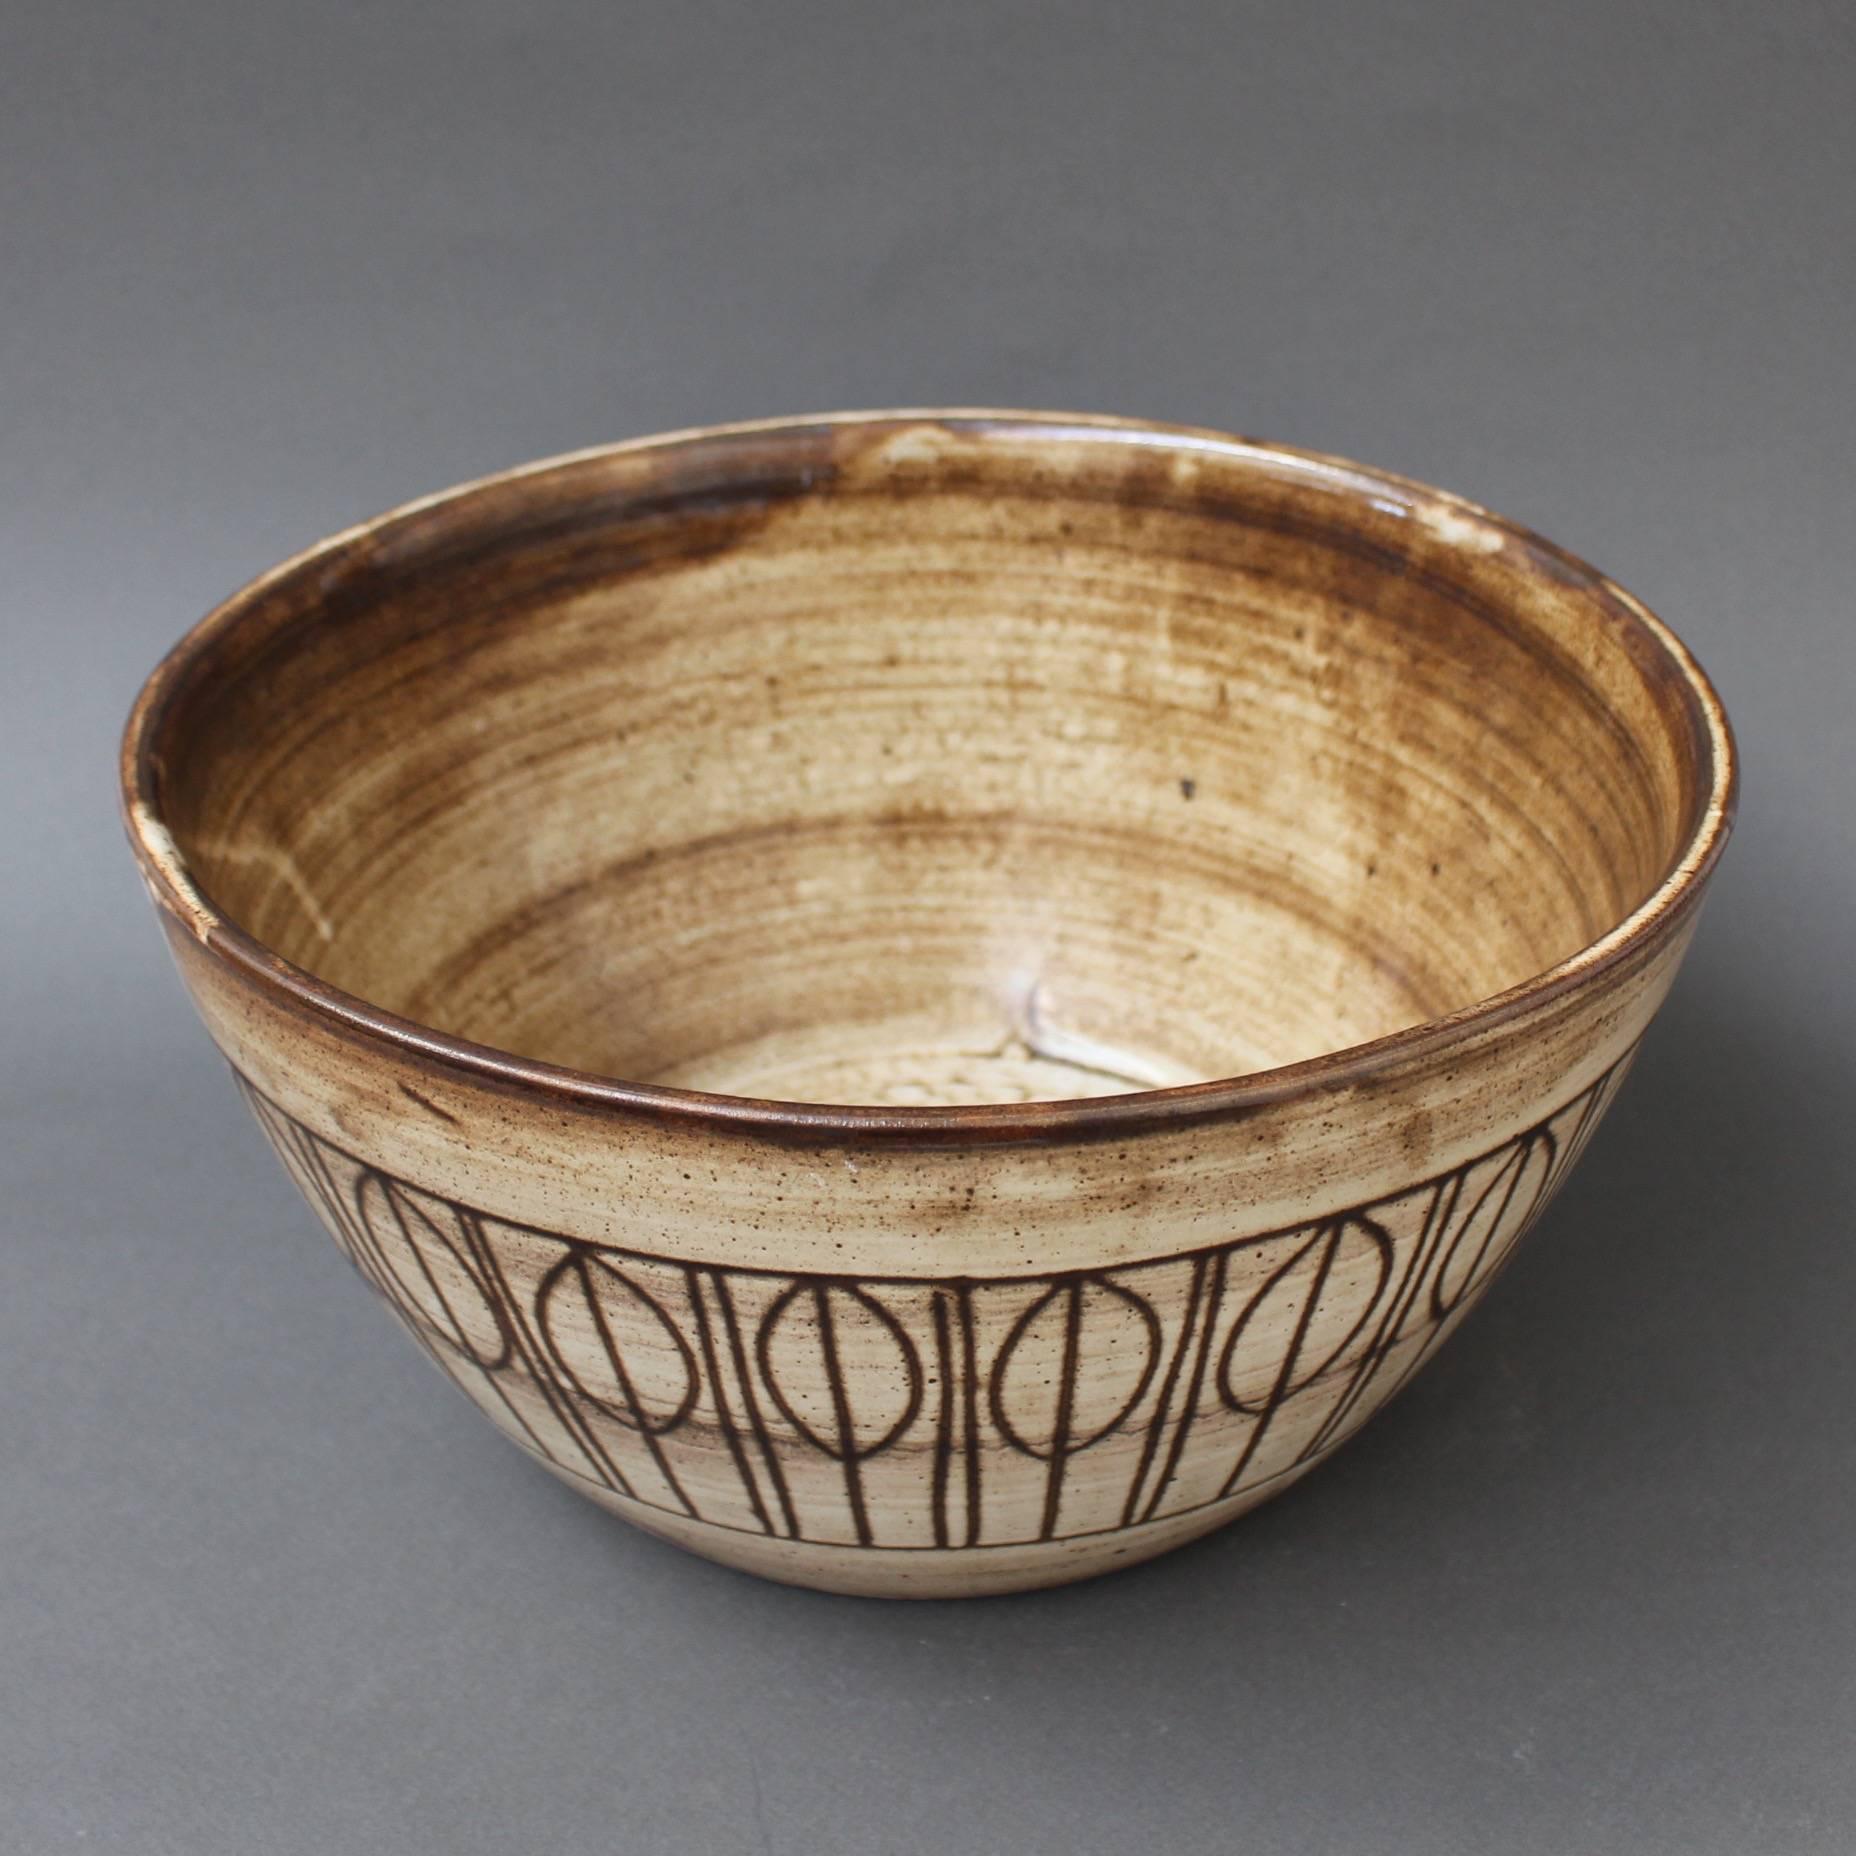 Midcentury decorative bowl, circa 1960s by Jacques Pouchain, Atelier Dieulefit. This decorative bowl was created in Pouchain's trademark tones of brown. The inner bowl may remind one of the rings of Saturn and the drip effects, shooting stars. The